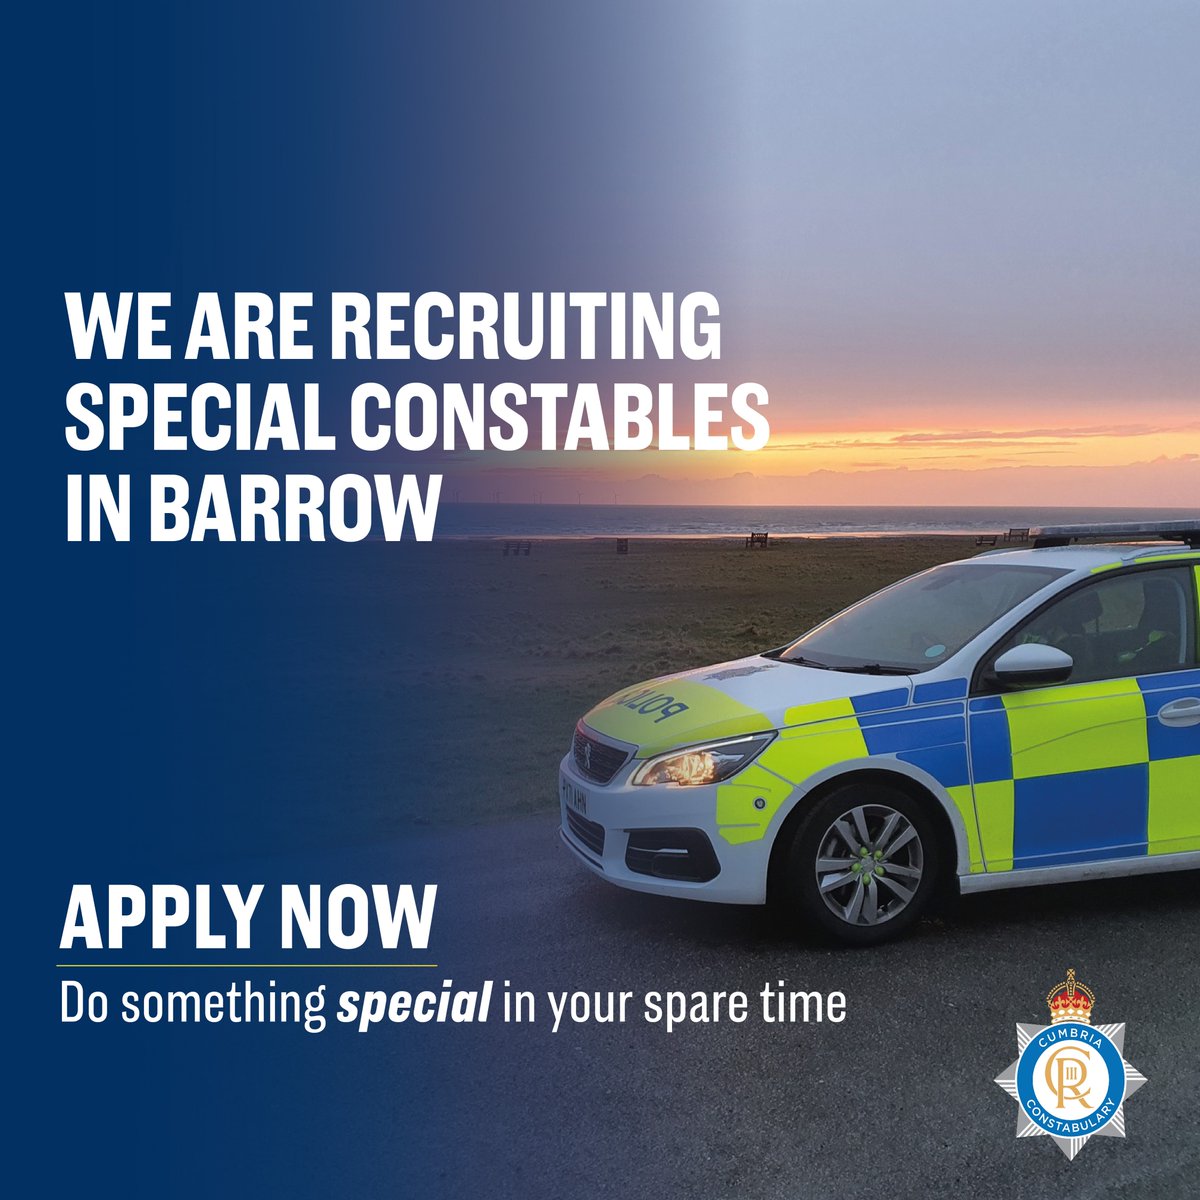 Become a Special Constable in Barrow 👮. The Special Constabulary gives you the opportunity to have a second career. This is a great opportunity to meet people from all walks of life and gain experience in a wide range of policing duties. Find out more 👉 orlo.uk/EpOHO